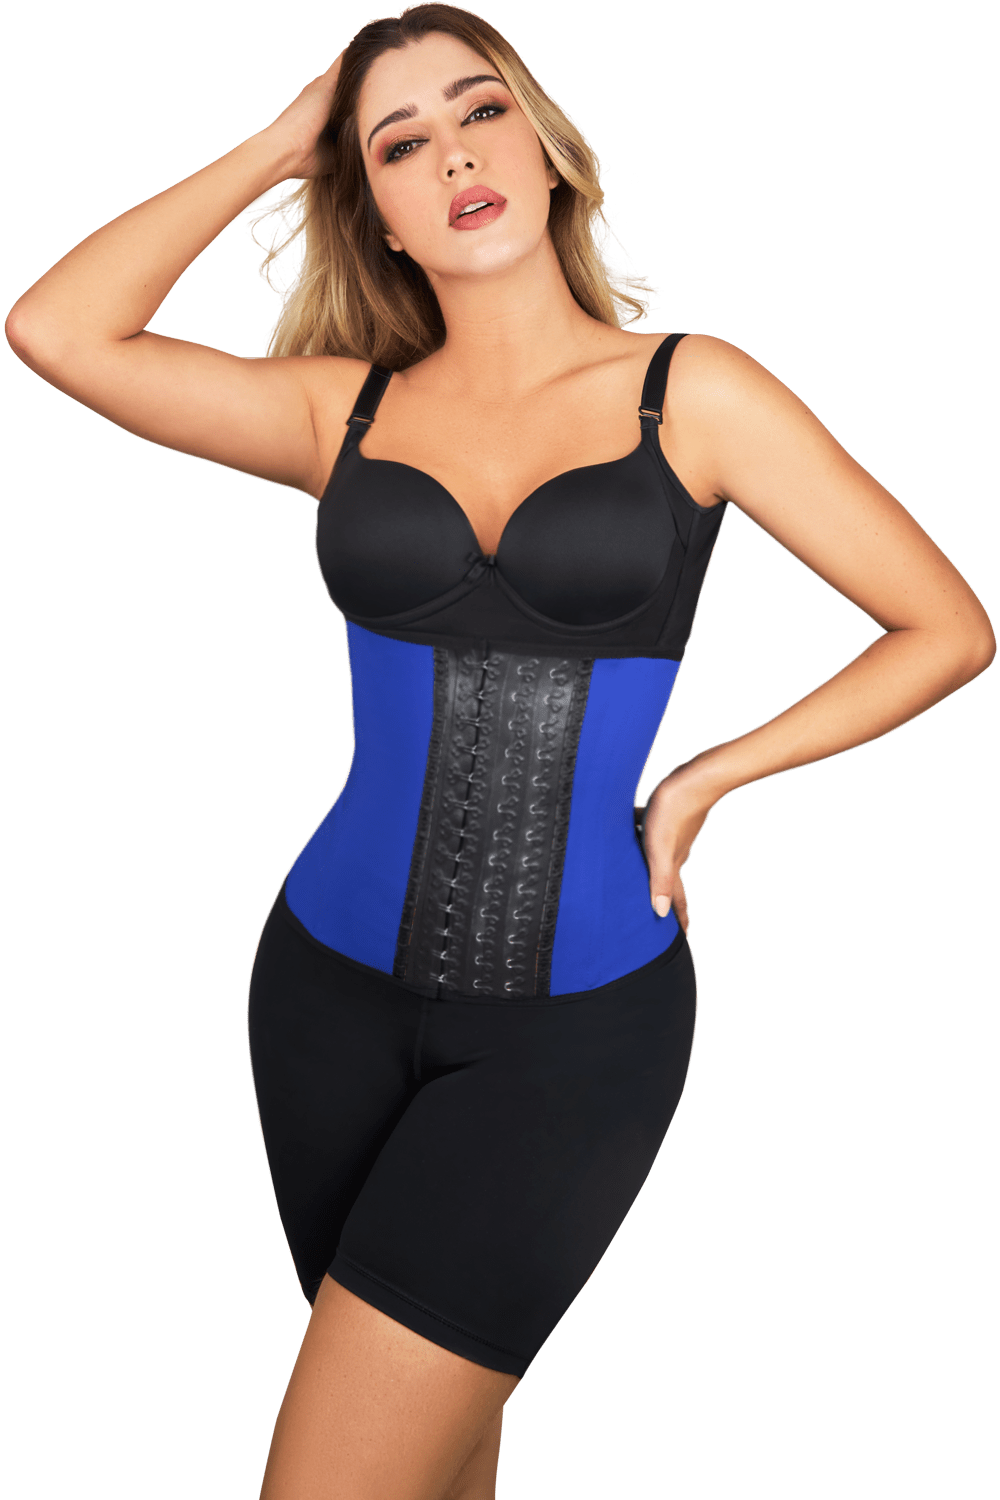 Latex Bodysuit With Underbust Plus Size Corset Bodysuit And Waist Trainer  For Women Colombian Style Body Shaper From Lbdapparel, $18.89